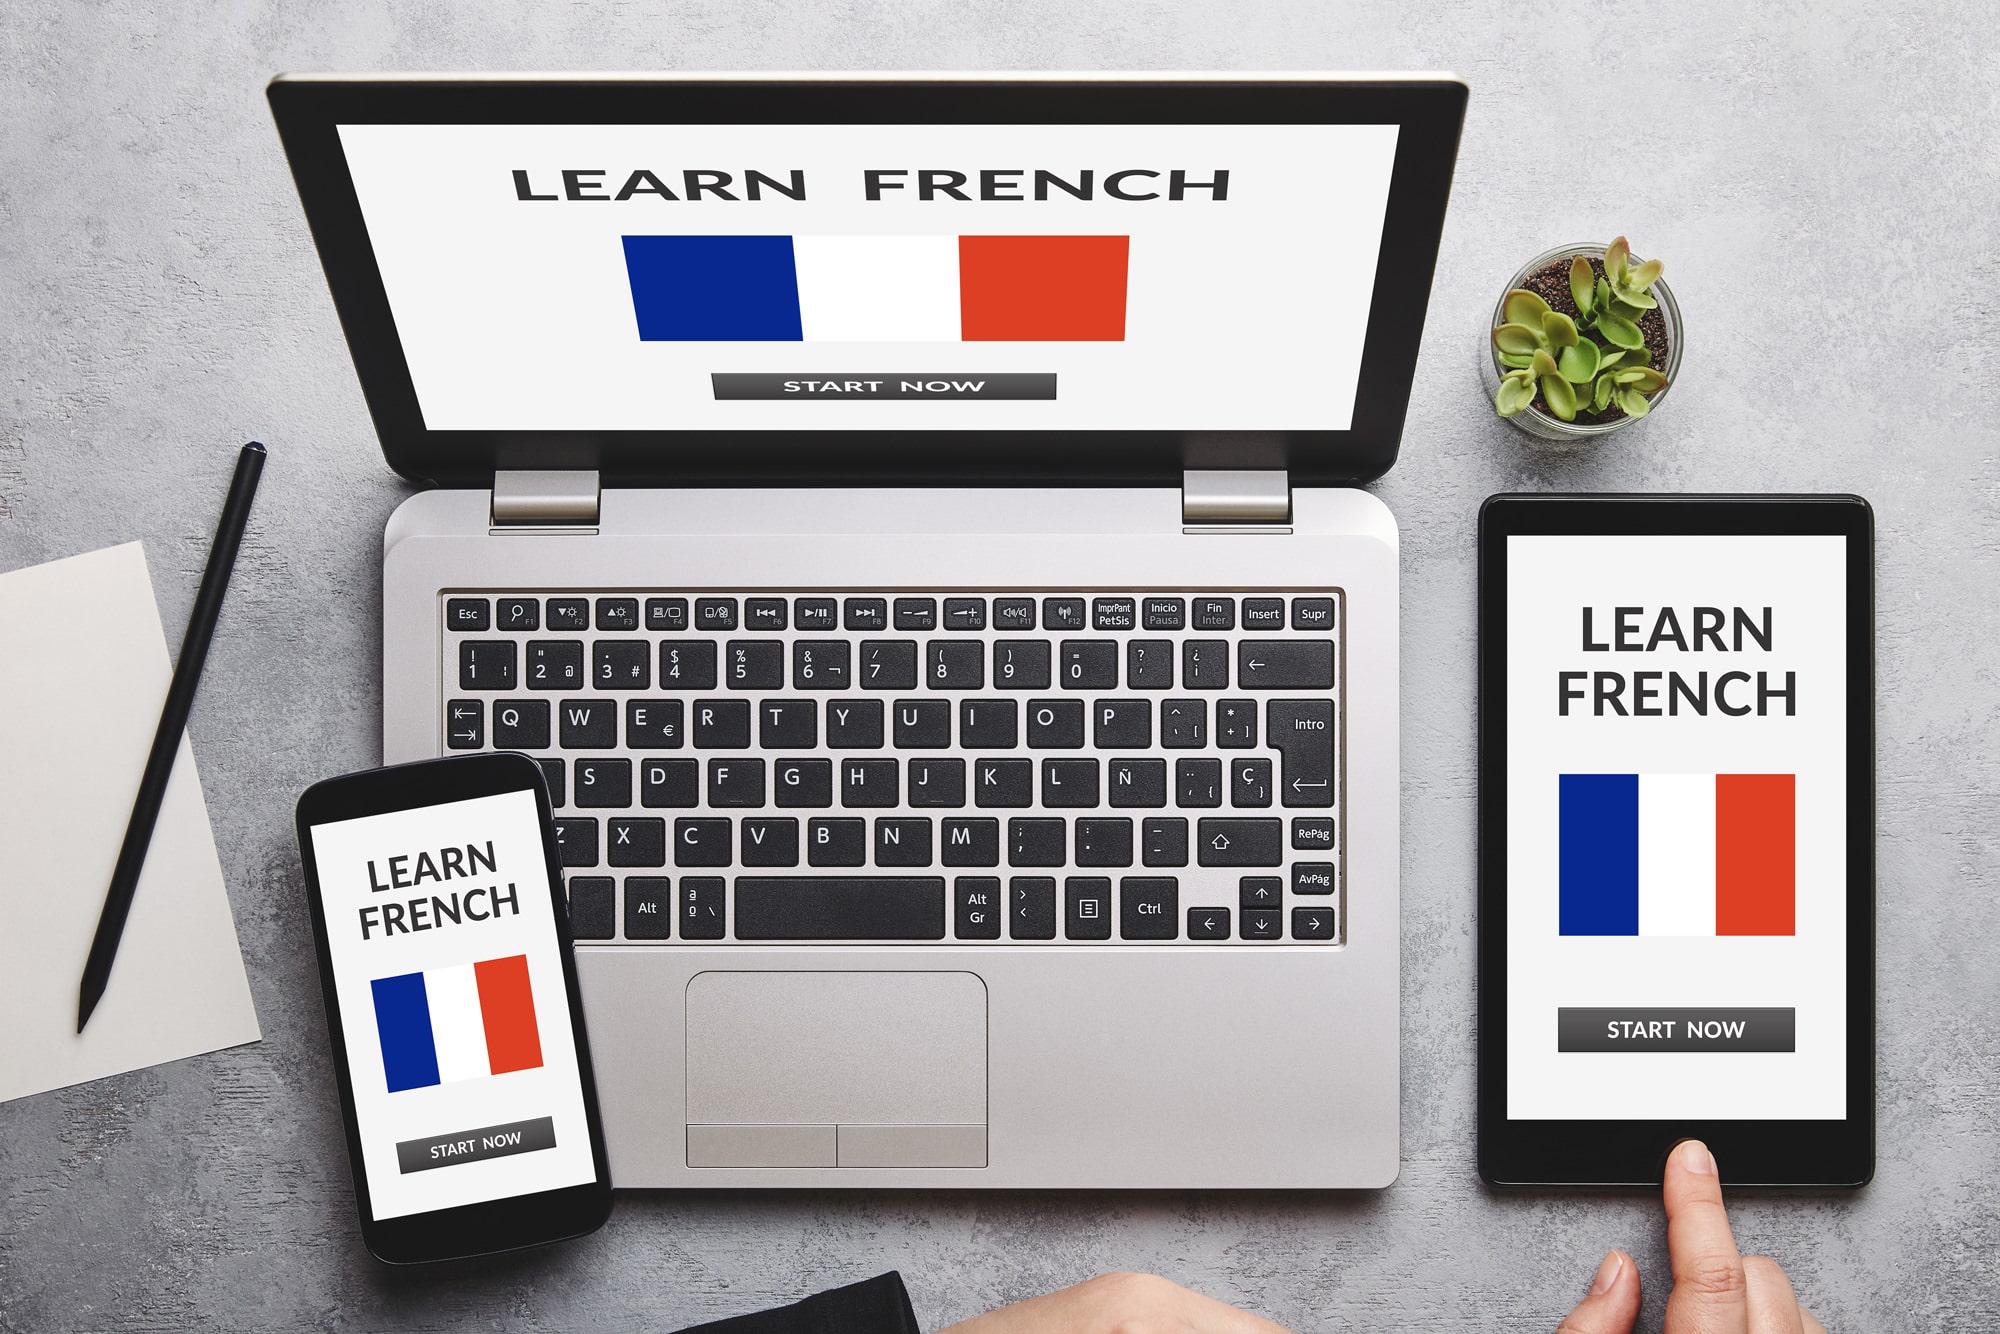 Online French Class - learn French - laptop, smartphone, tablet